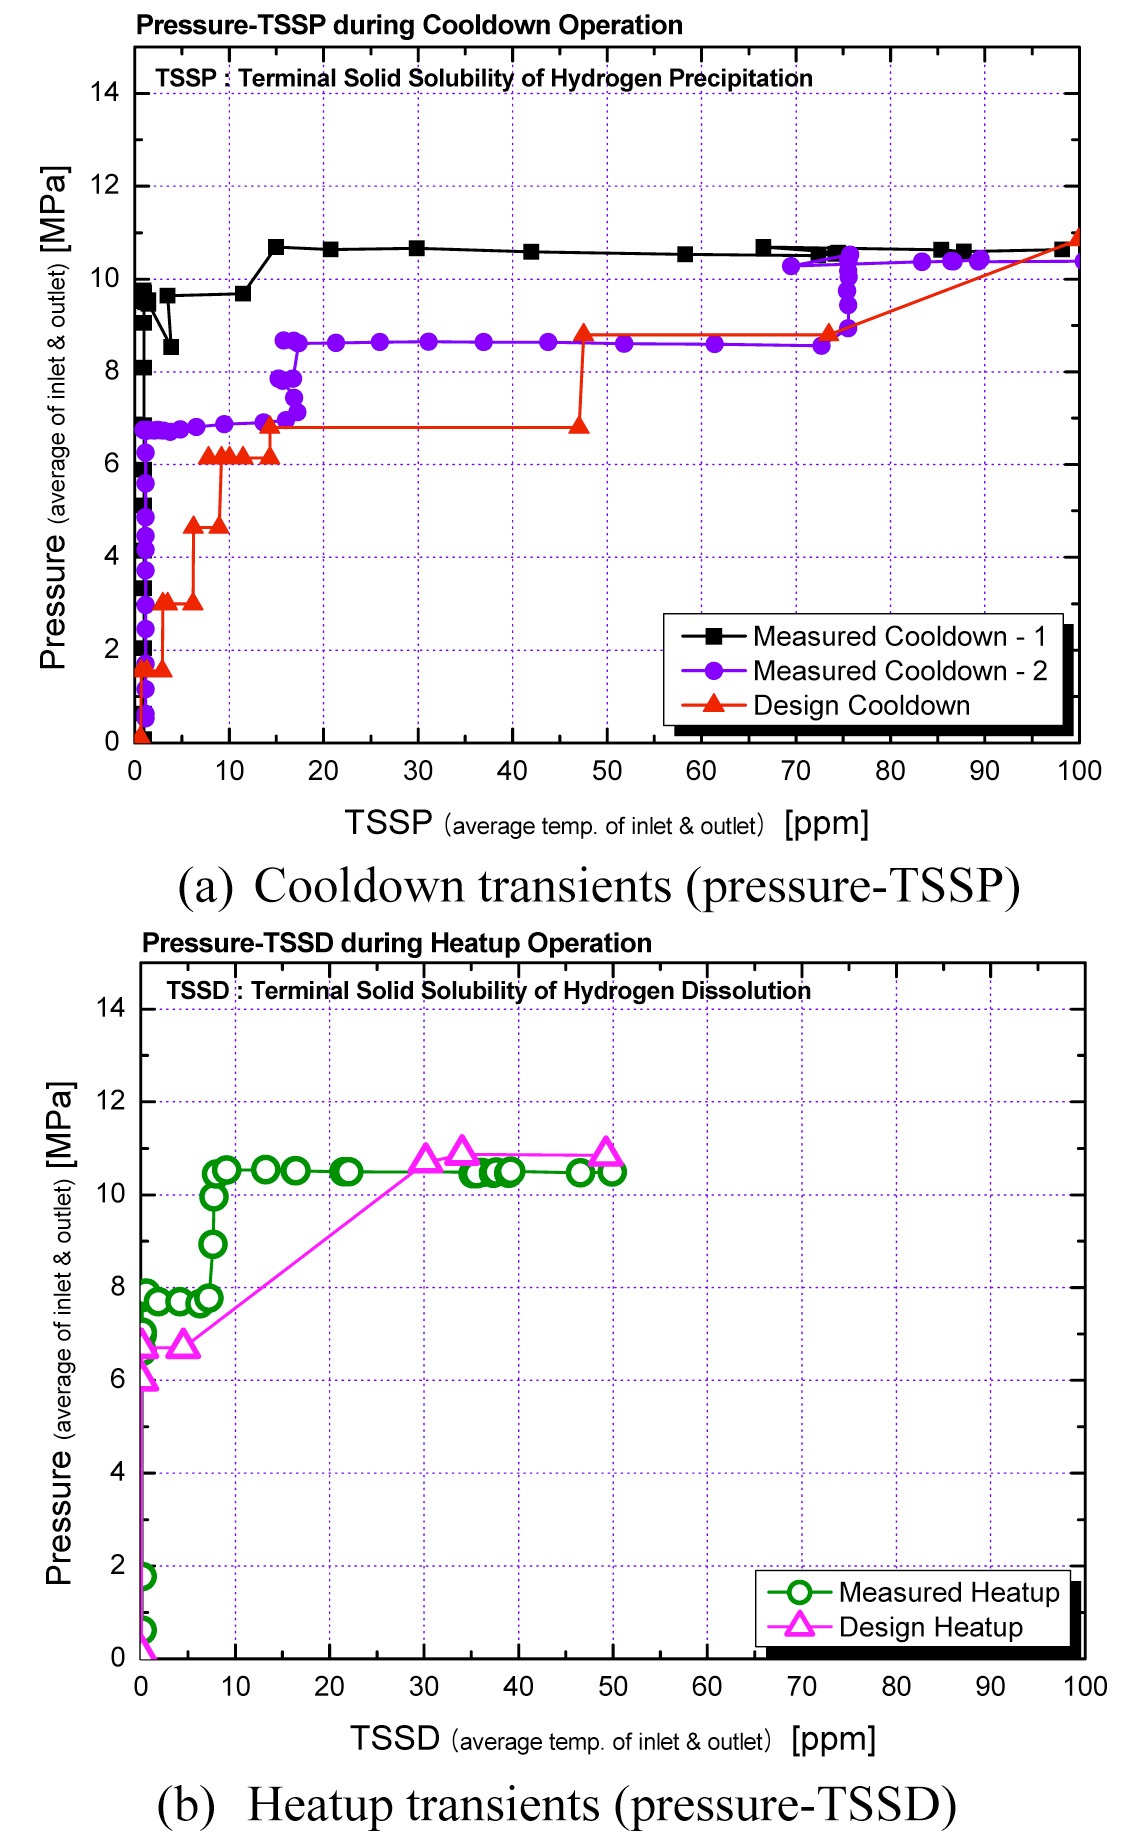 Comparison of Pressure vs. Hydride Existence between Cooldown and Heatup Transients